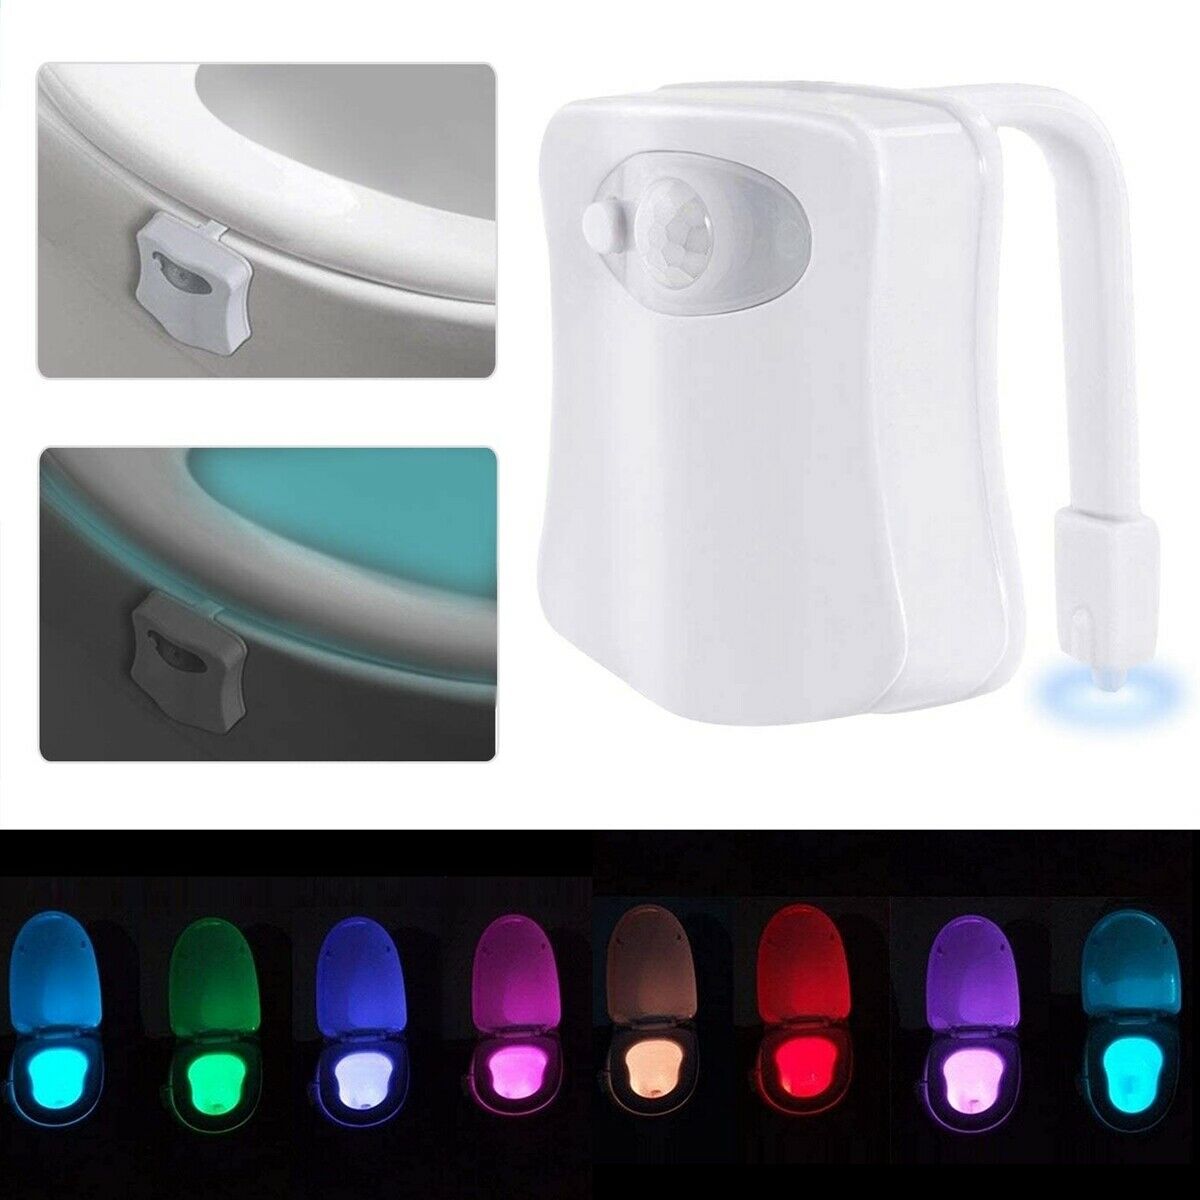 The Original GLOW BOWL as seen on TV Motion Activated Night Light  Illuminated